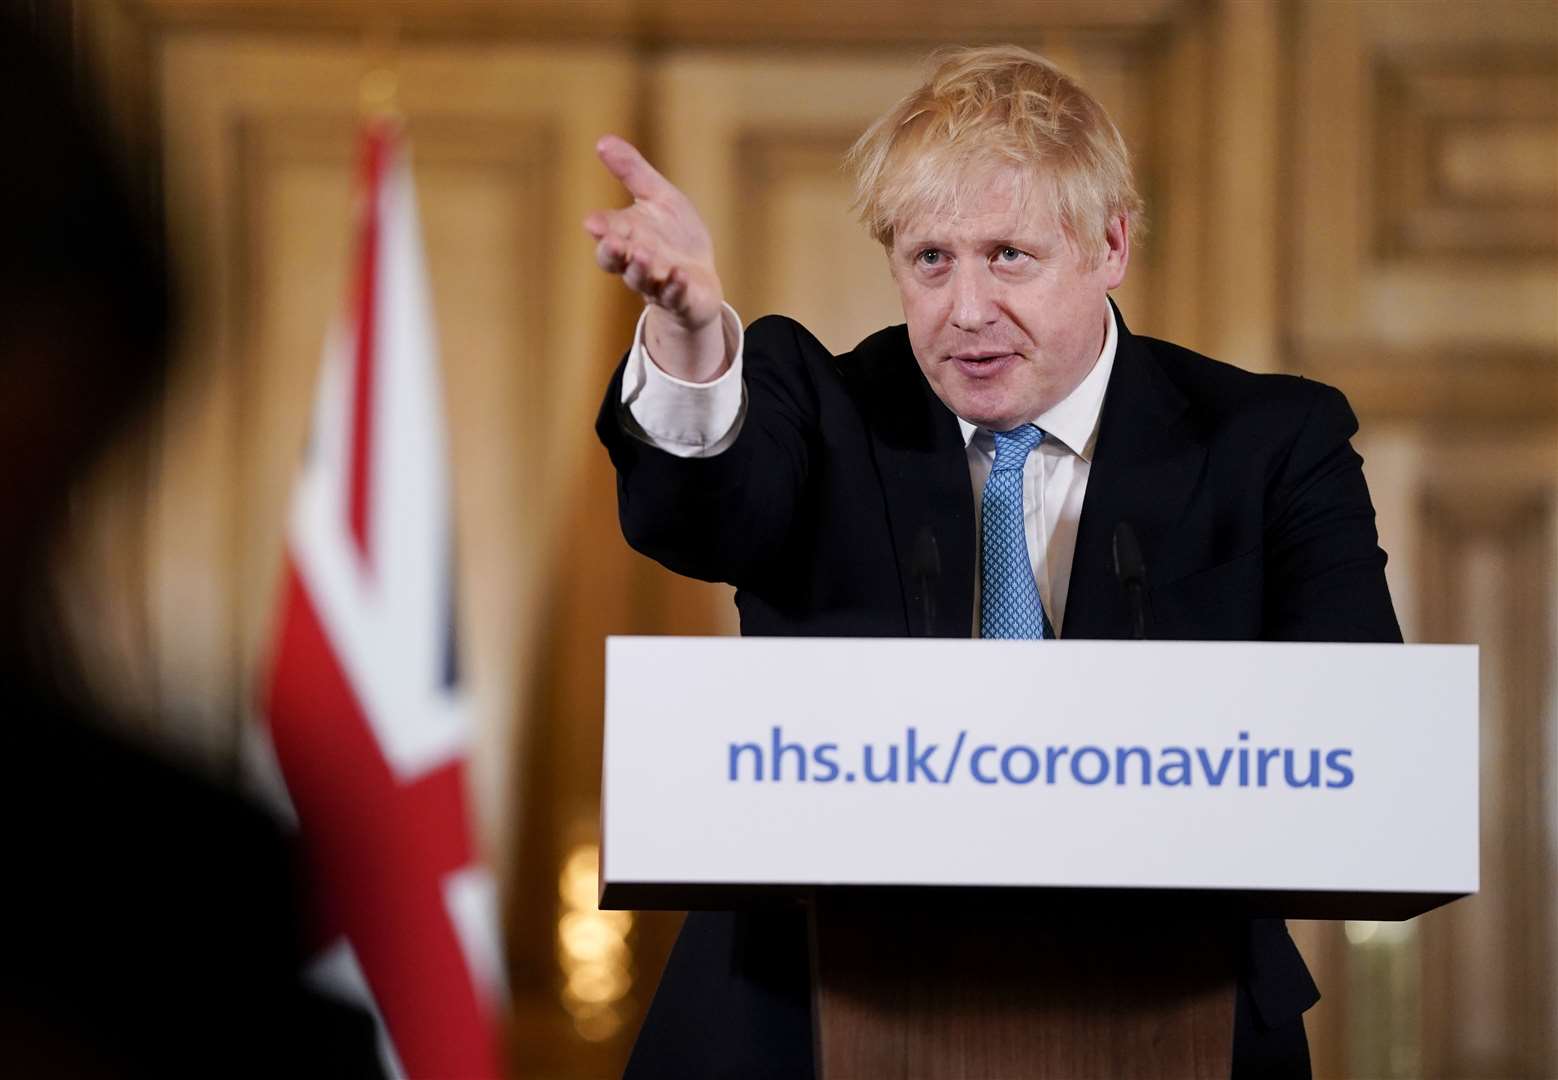 Prime Minister Boris Johnson promises 'cautious' approach. Picture: Andrew Parsons / No 10 Downing Street